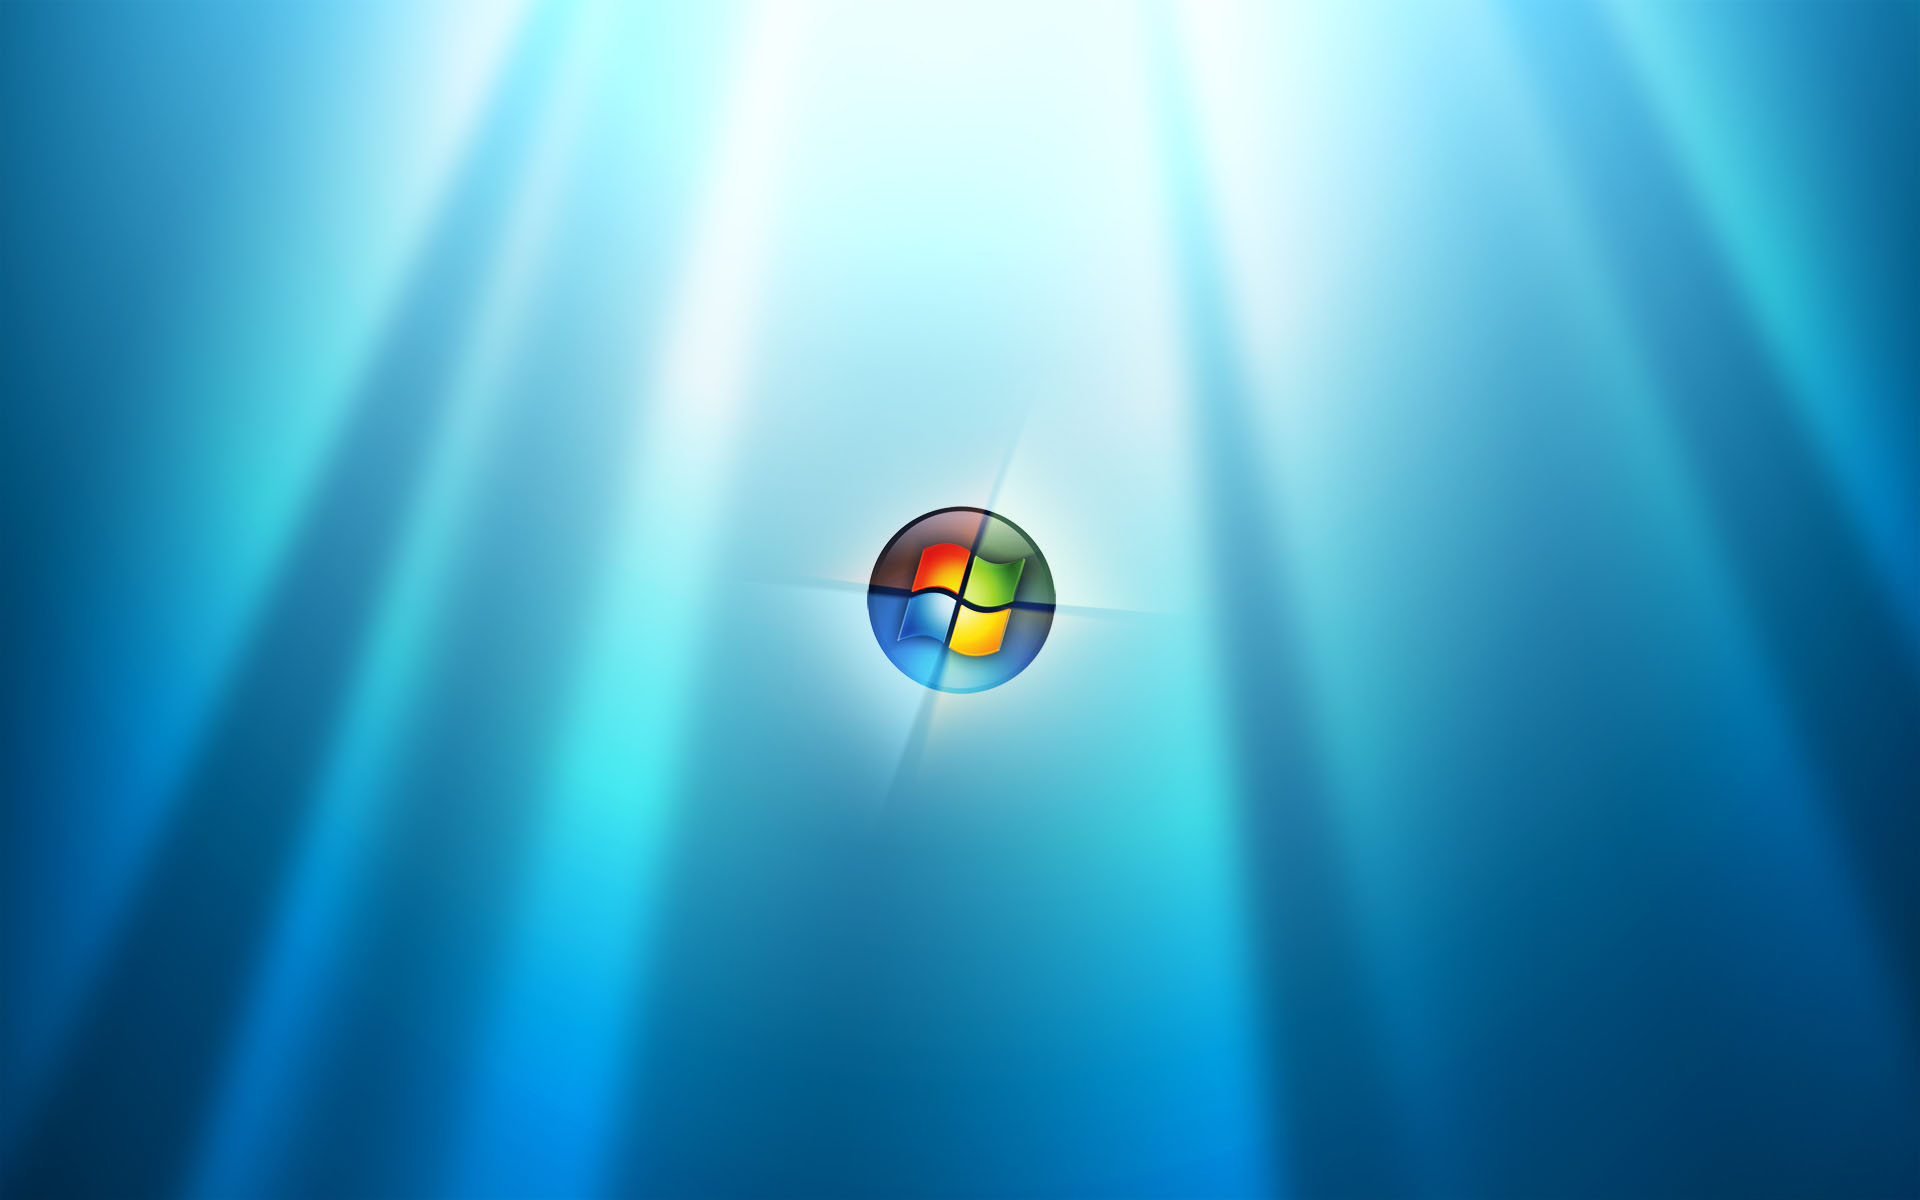 Free HQ Windows 7 Ultimate 10 Wallpaper   Free HQ Wallpapers